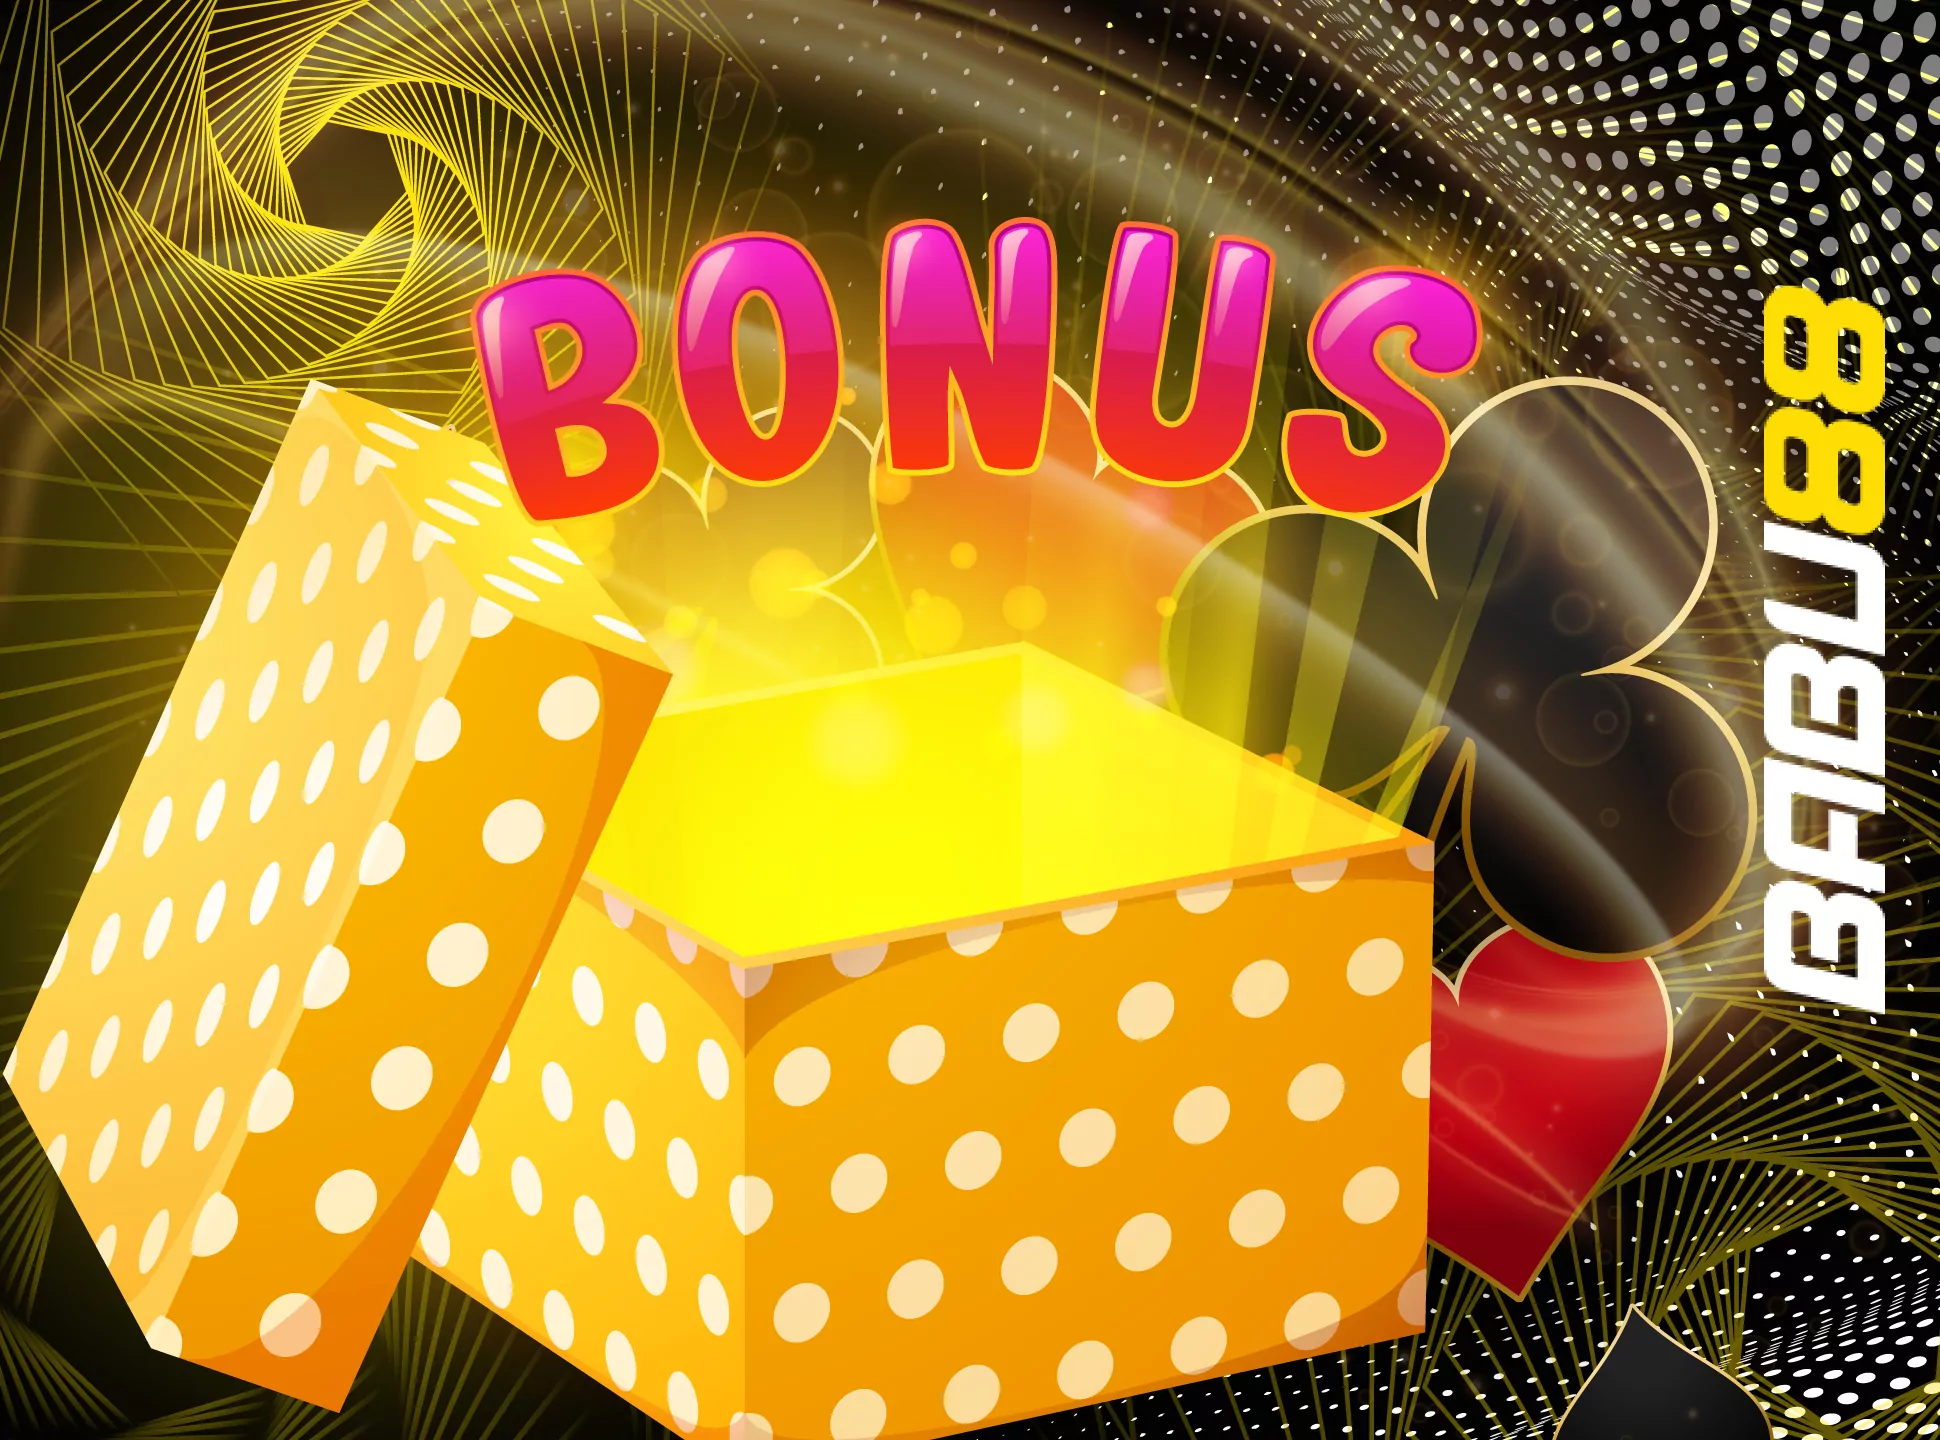 You can spend your welcome bonus of 13,000 BDT on the live casino games at Babu88.